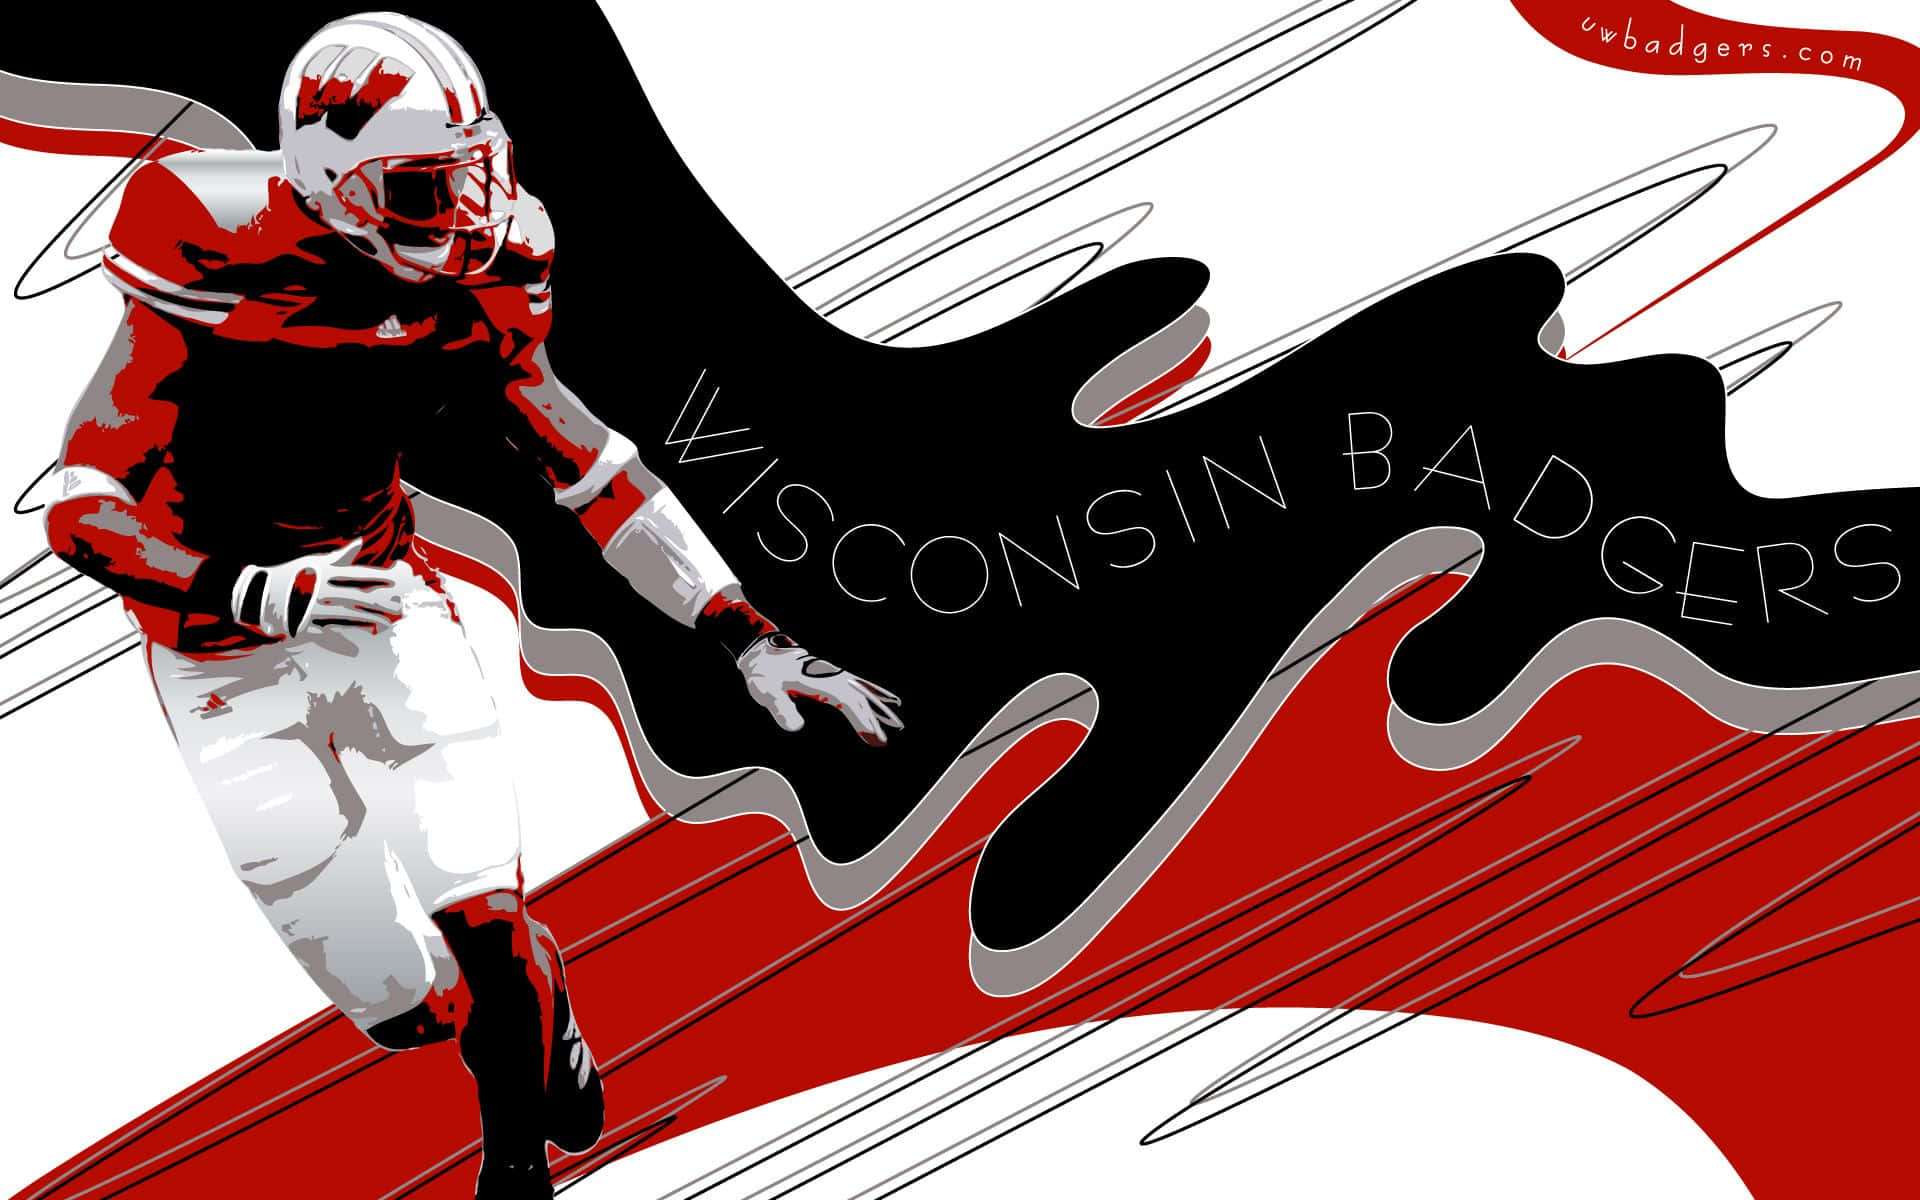 The Wisconsin Badgers Logo on Red Background Wallpaper